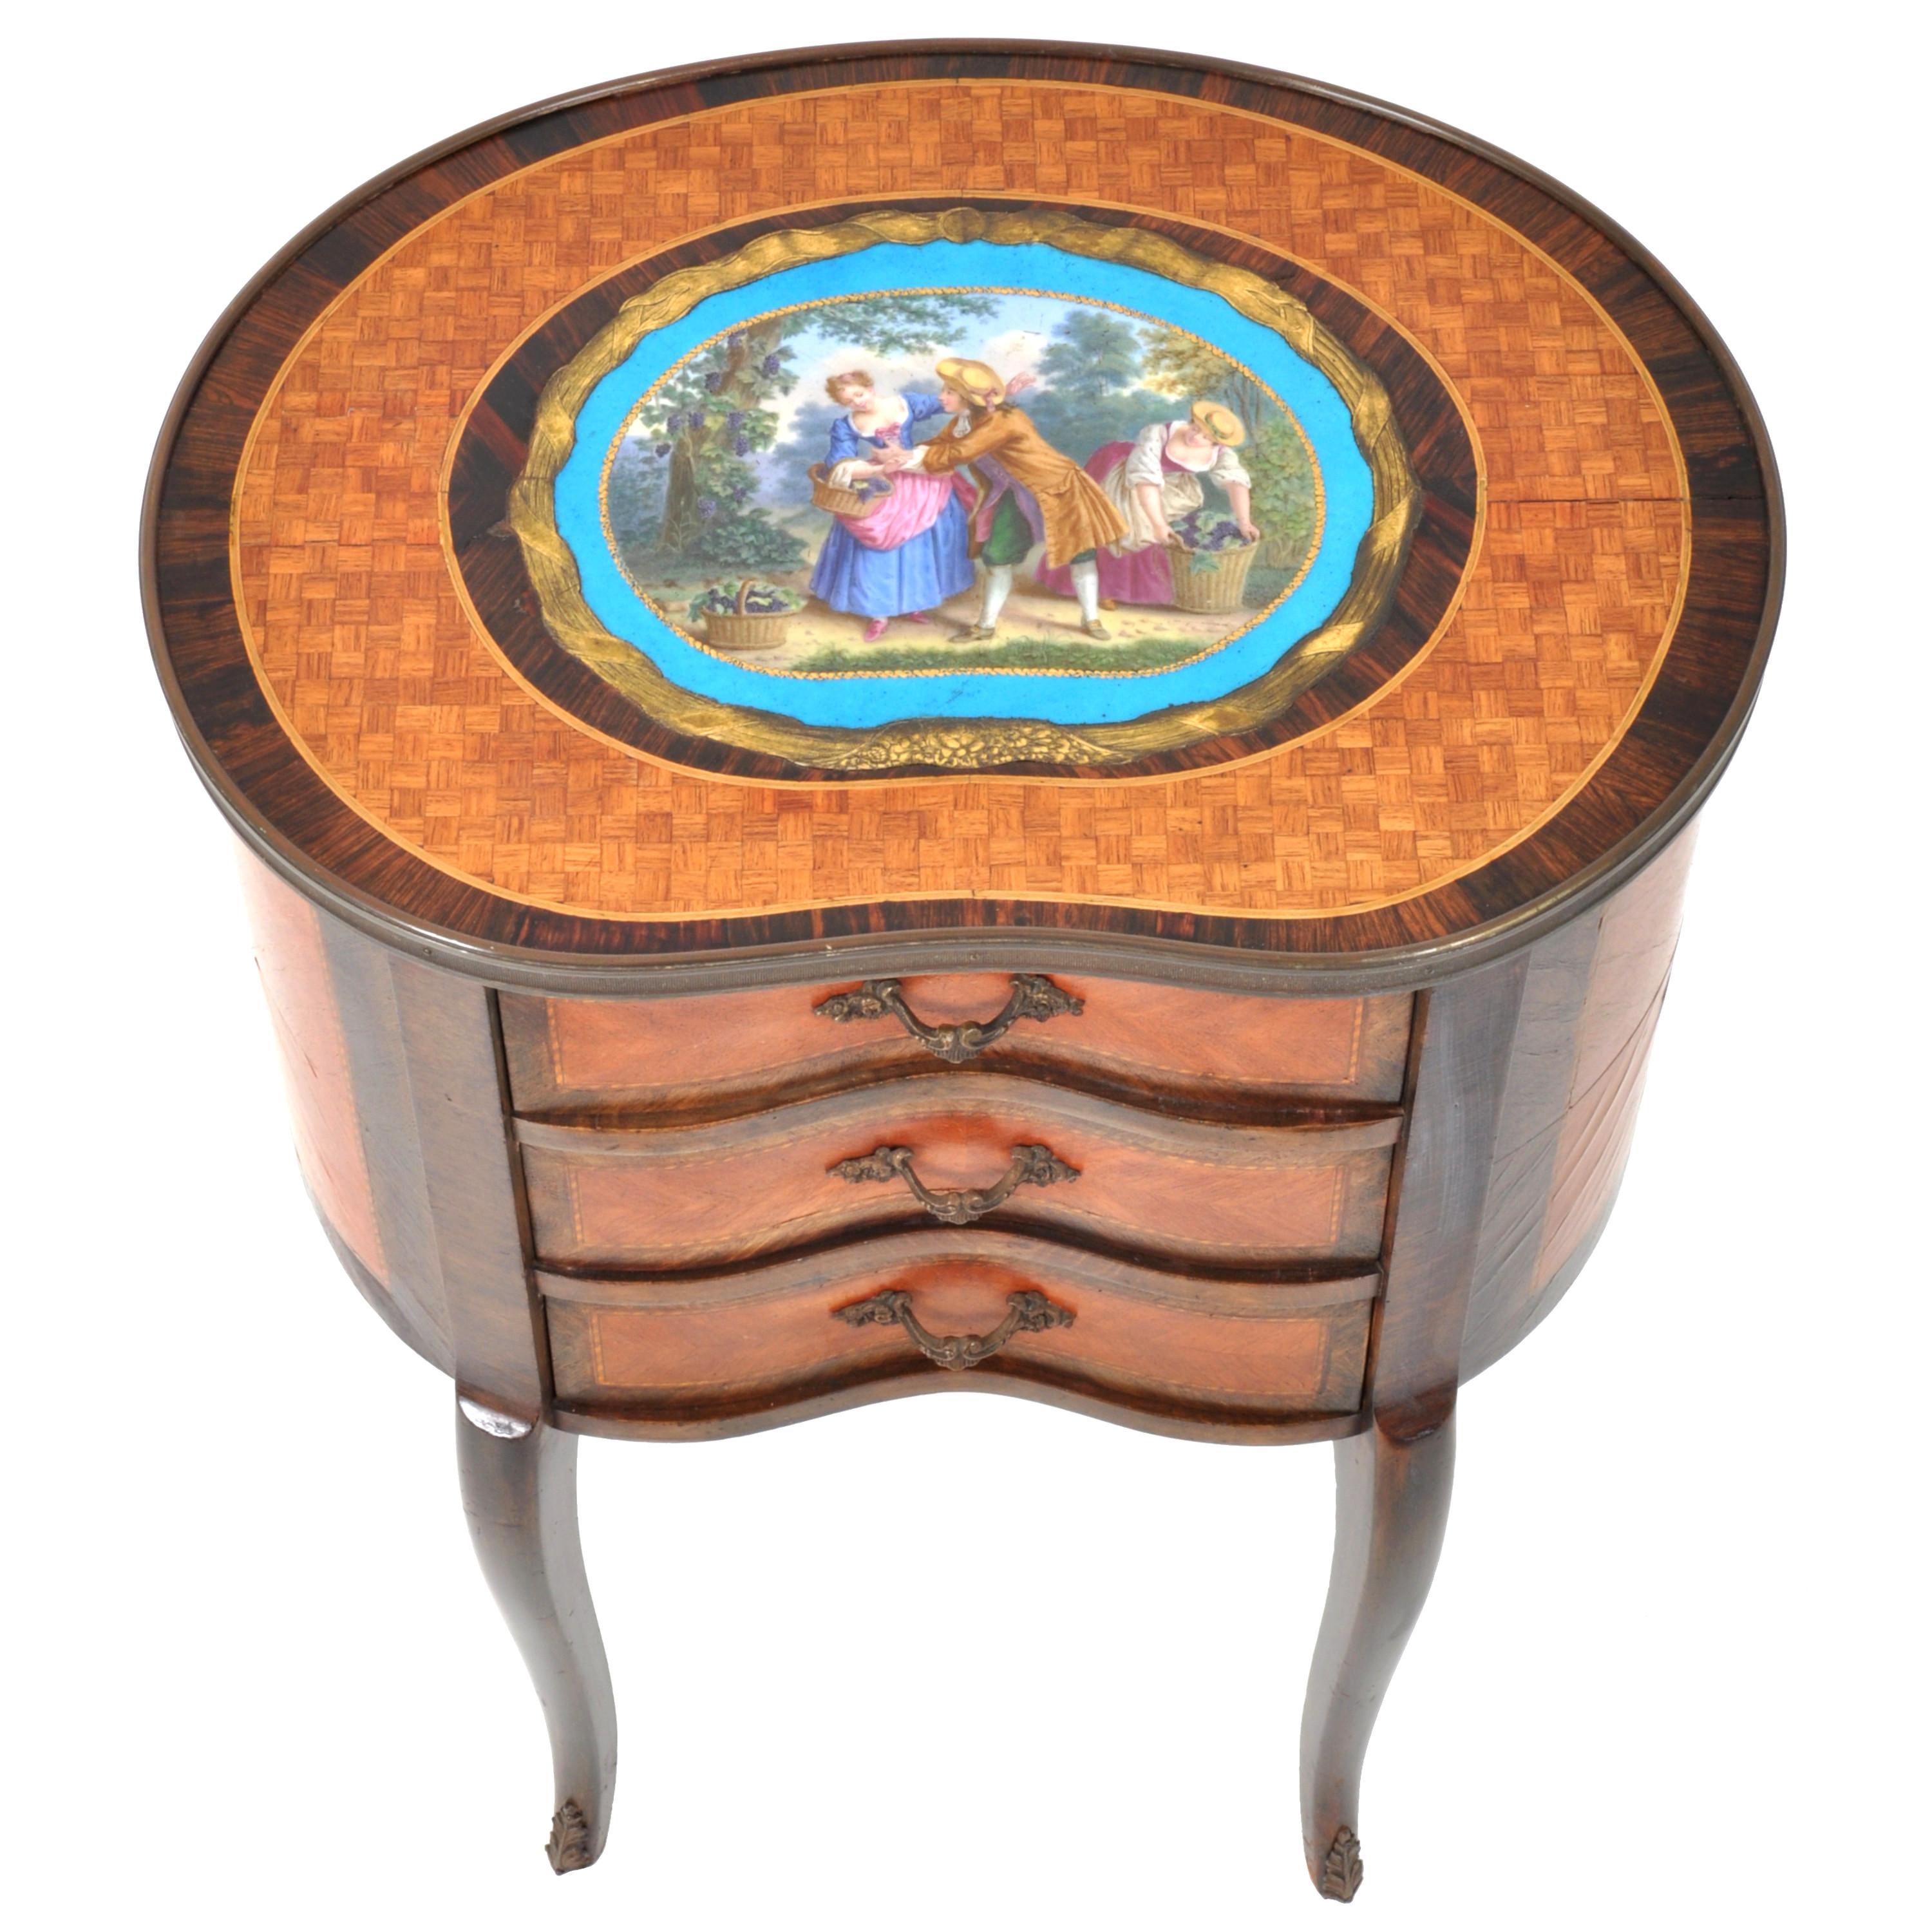 A very fine antique French Louis XV style inlaid 'kidney' shaped side table or chest, inlaid walnut with a large Sevres style plaque depicting lovers in 18th century dress, circa 1880. The top is inlaid with a large enameled 'Bleu Celeste' Sevres